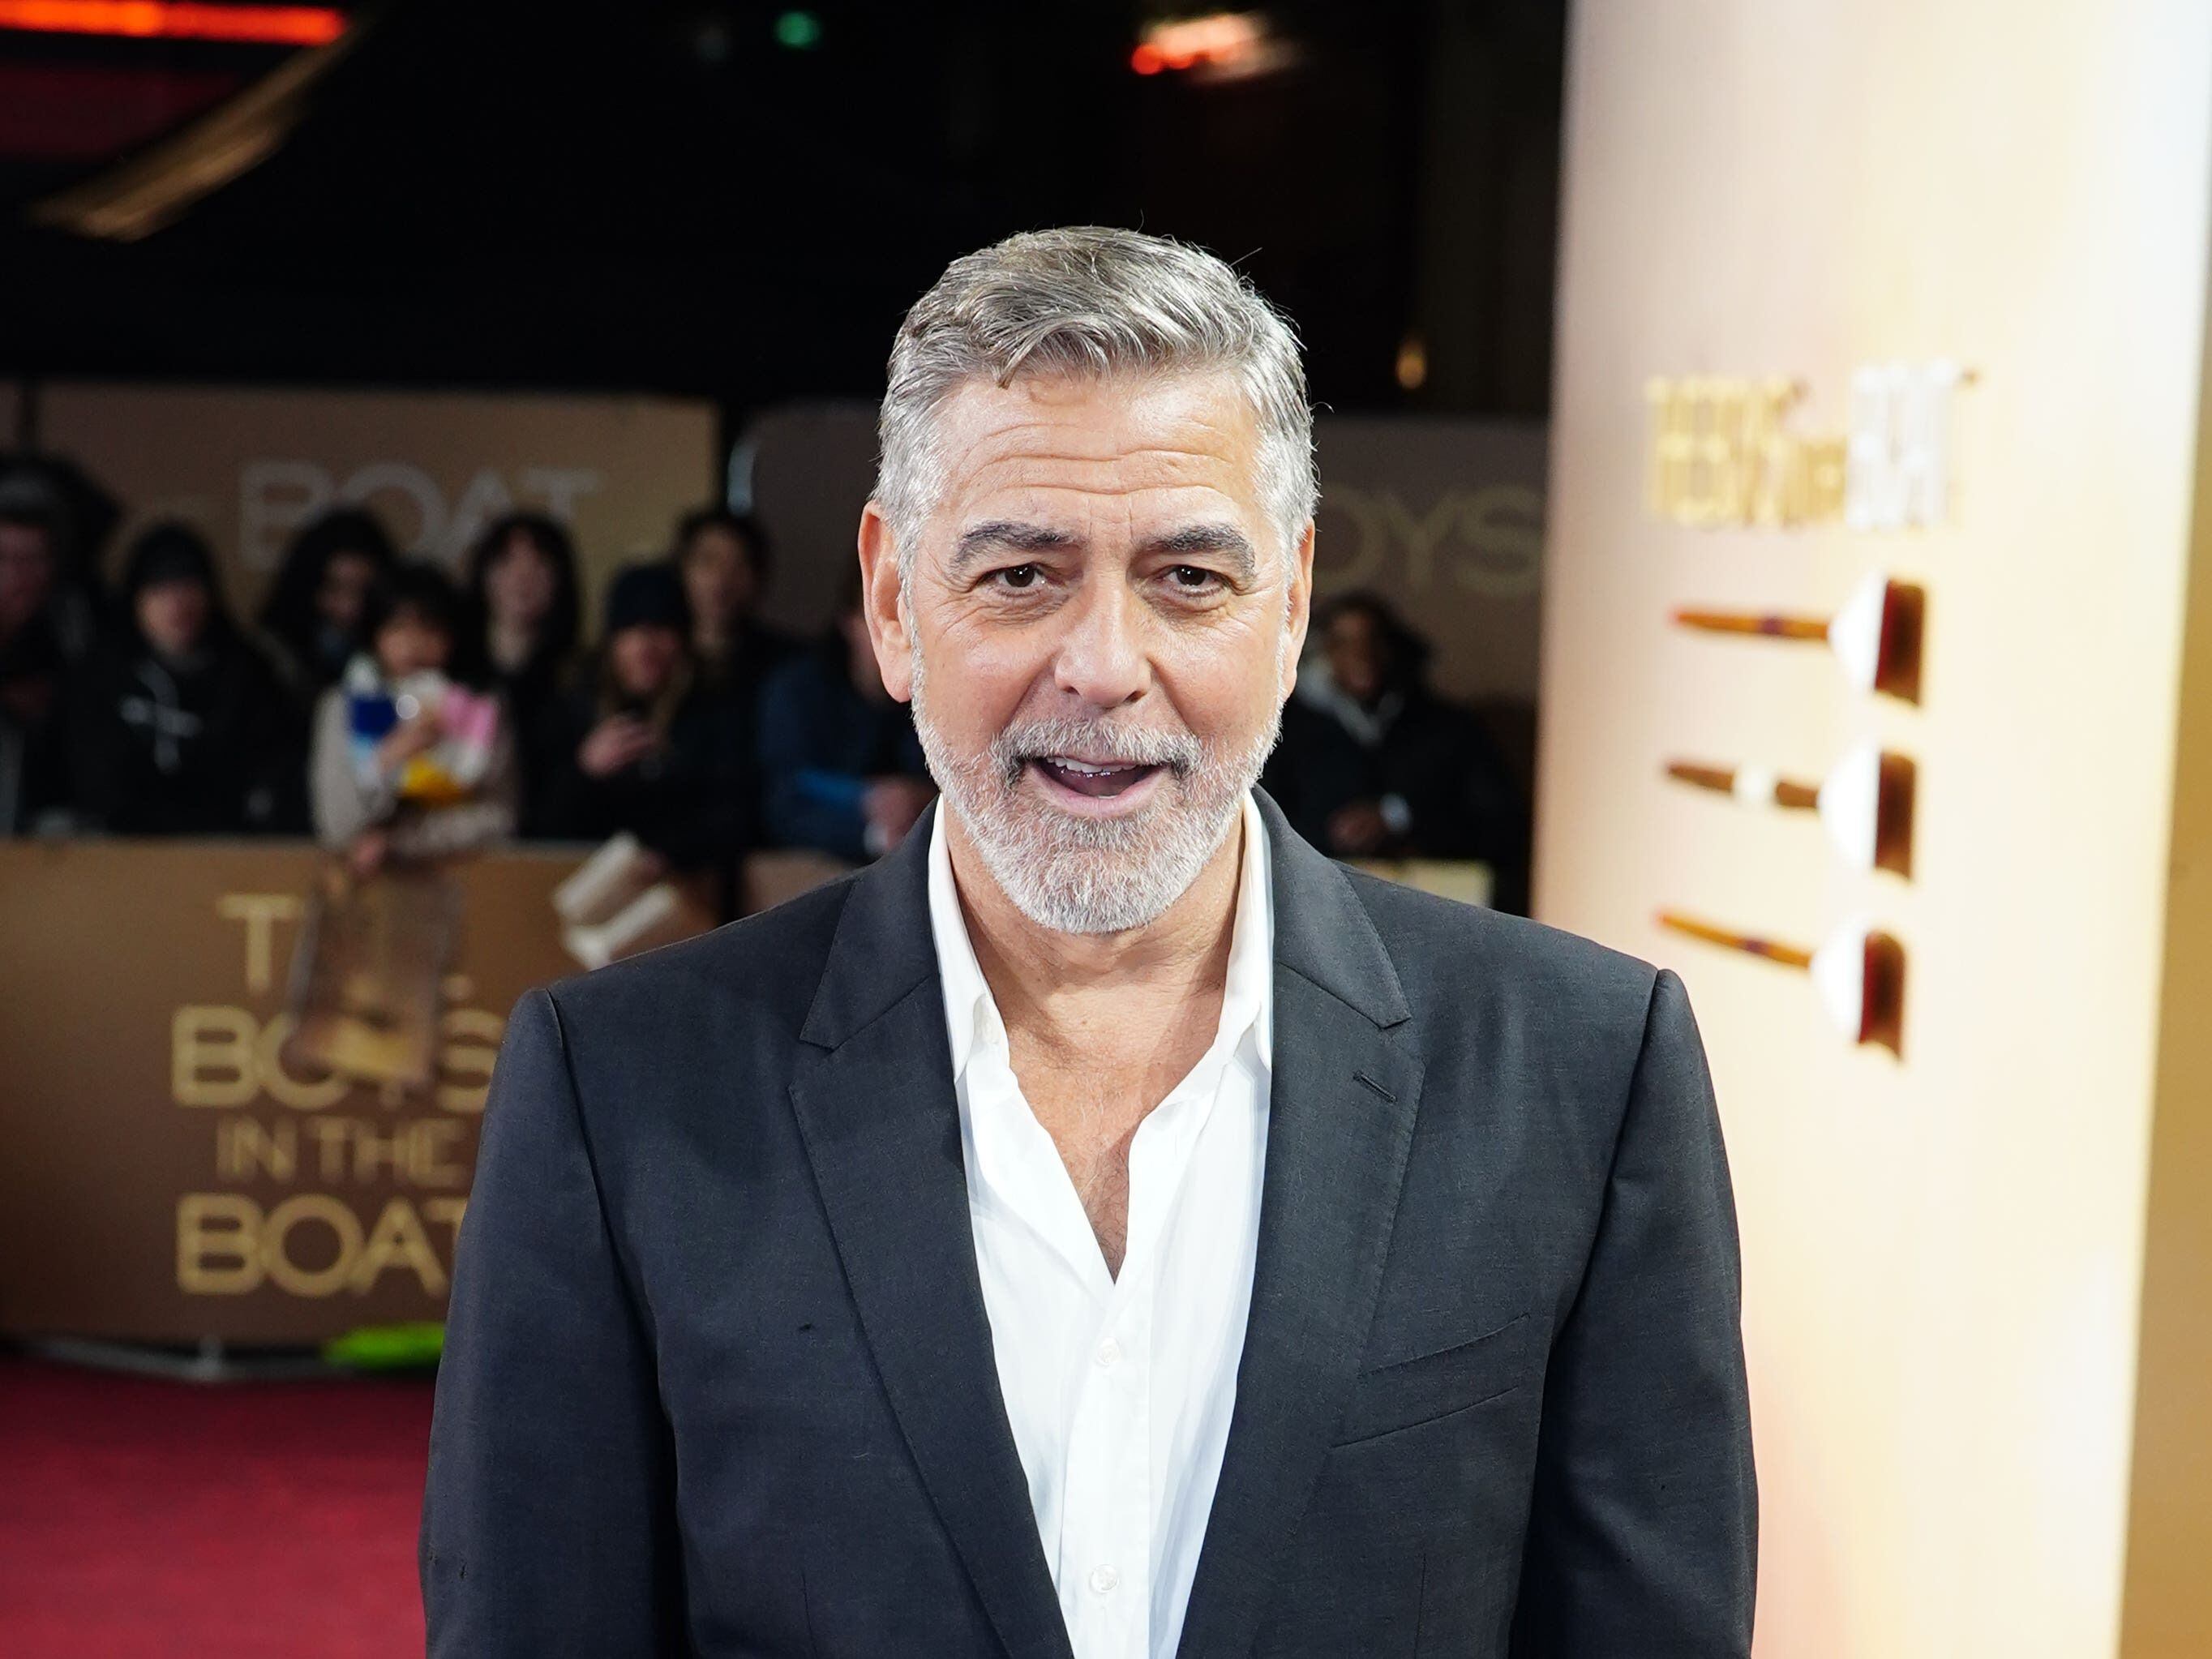 George Clooney to make Broadway debut in Good Night, And Good Luck